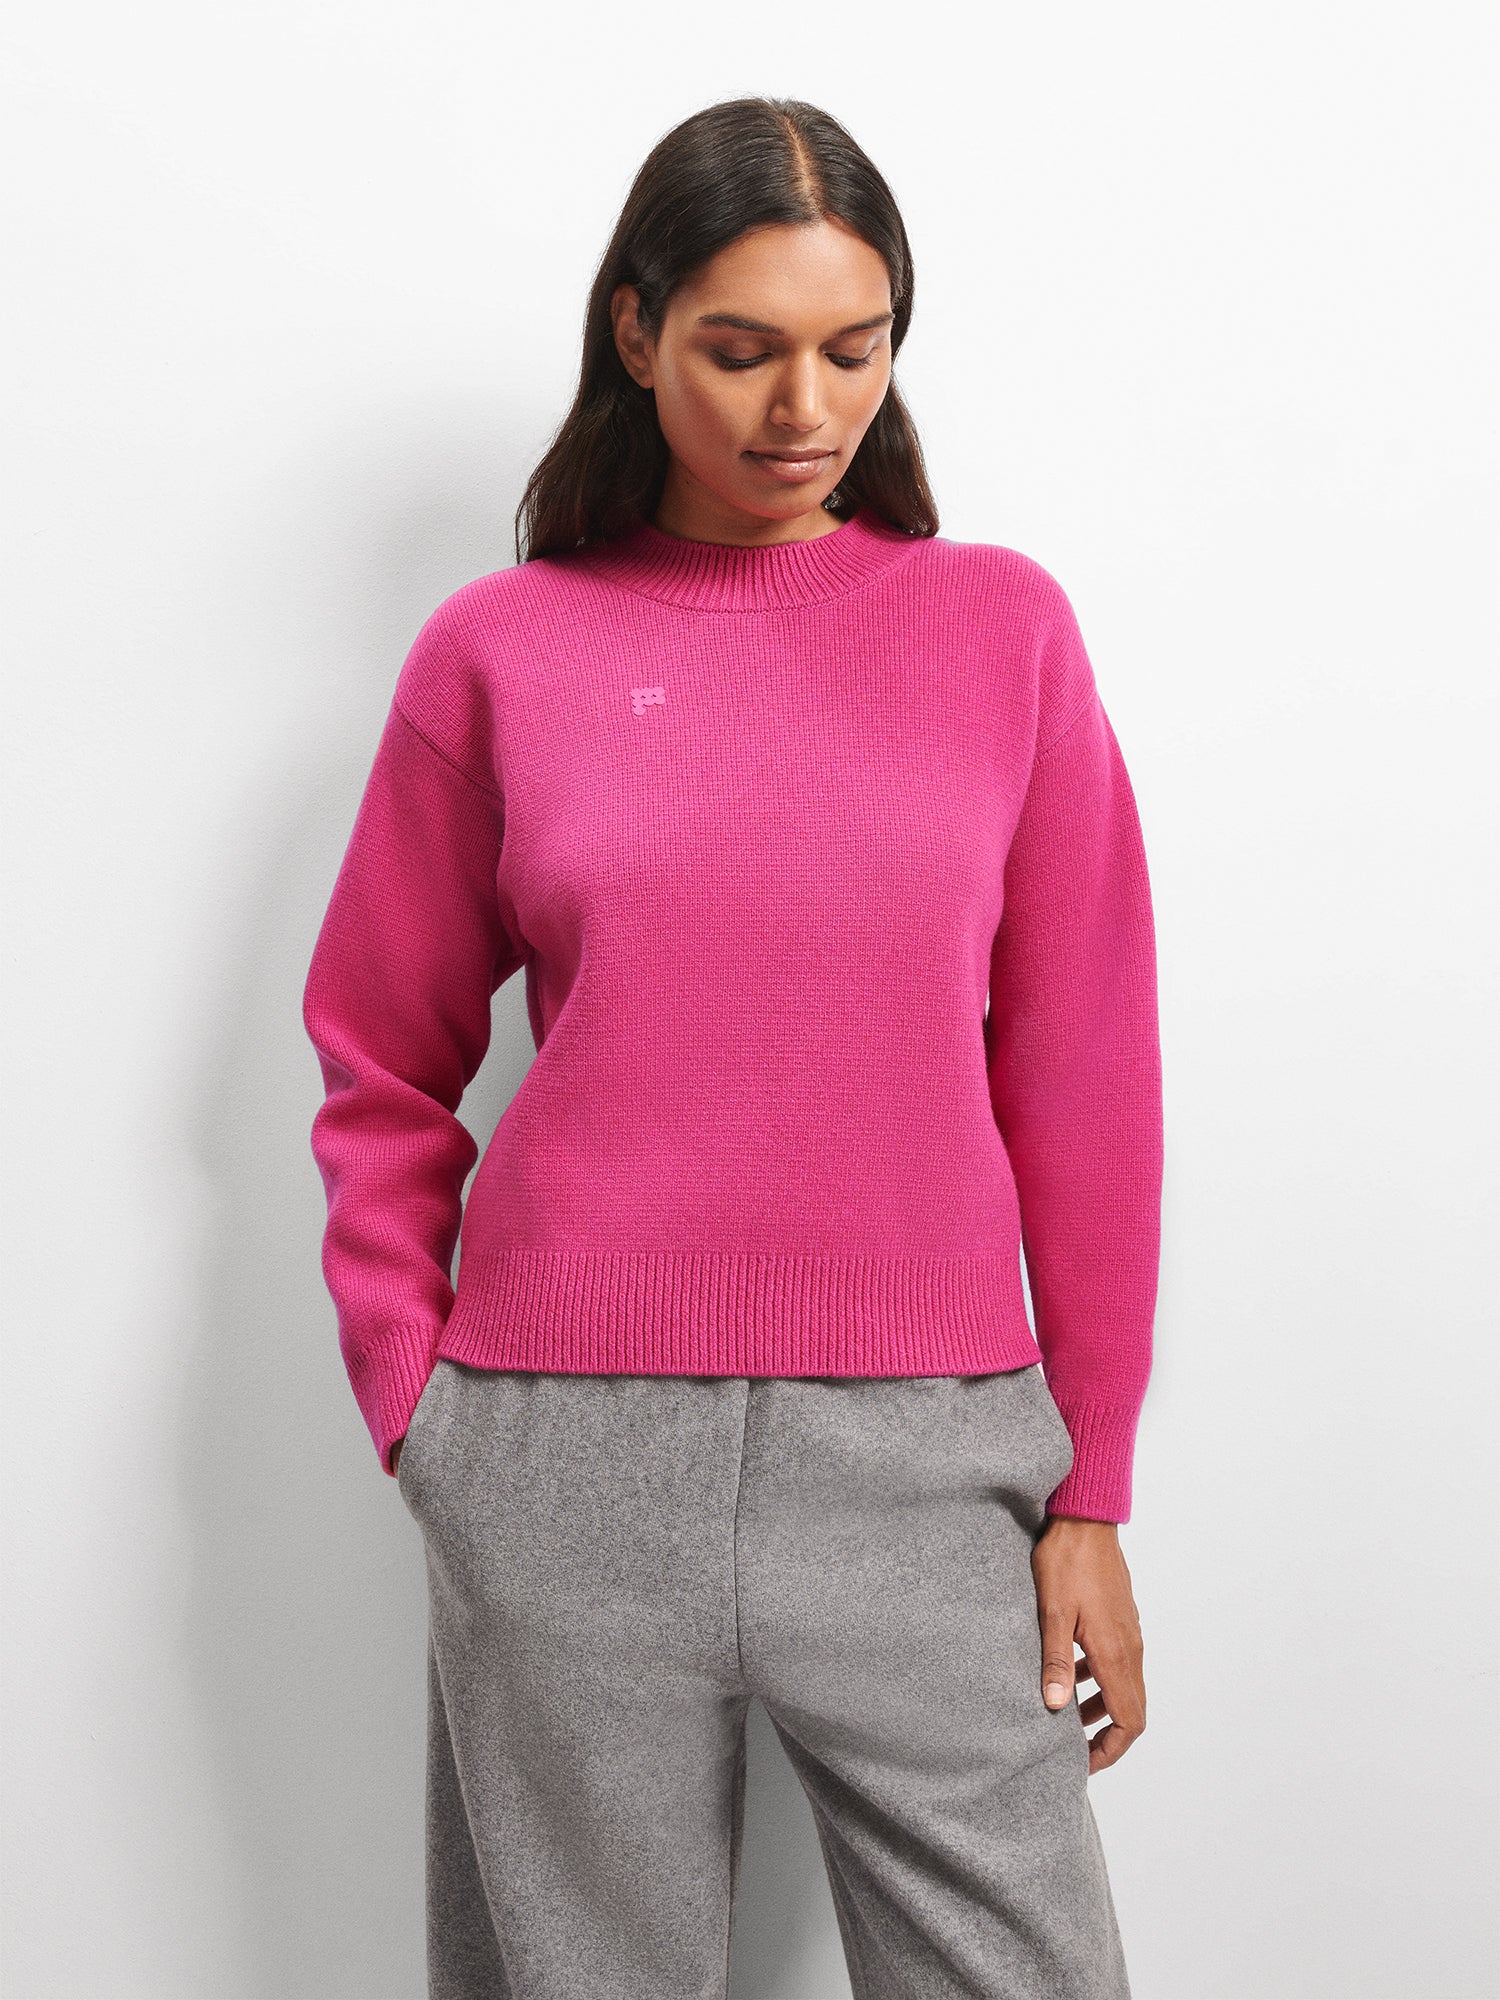 Womens_Recycled_Cashmere_Knit_Crew_Neck_Sweater_Tourmaline_Pink-female-1